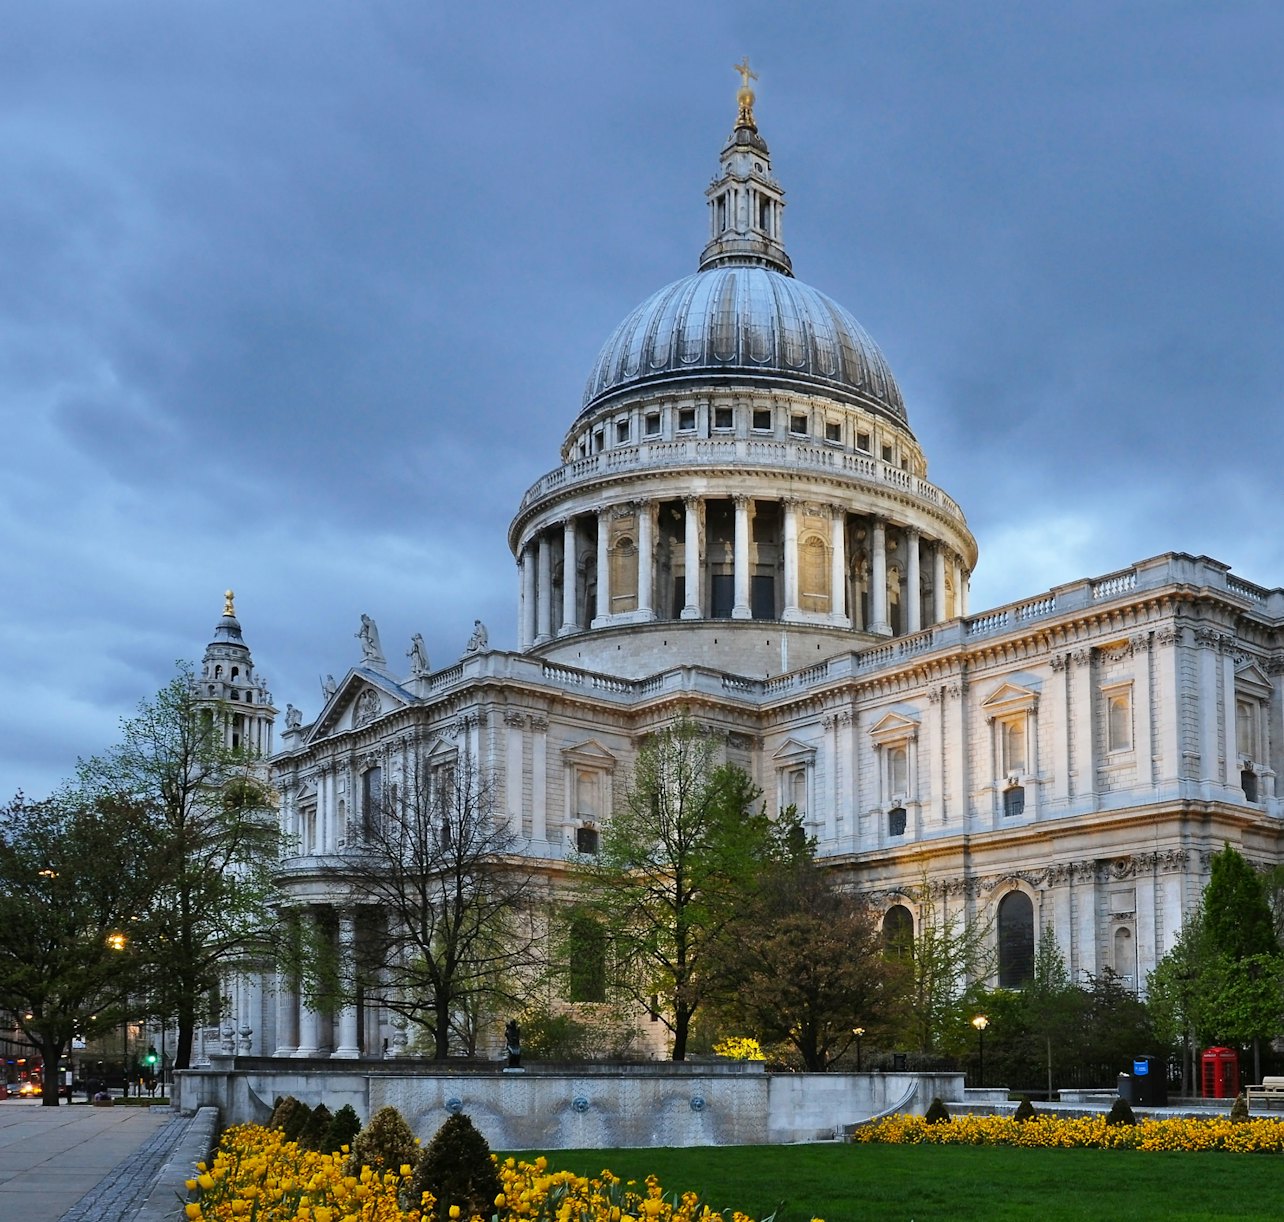 St Paul’s Cathedral - Accommodations in London